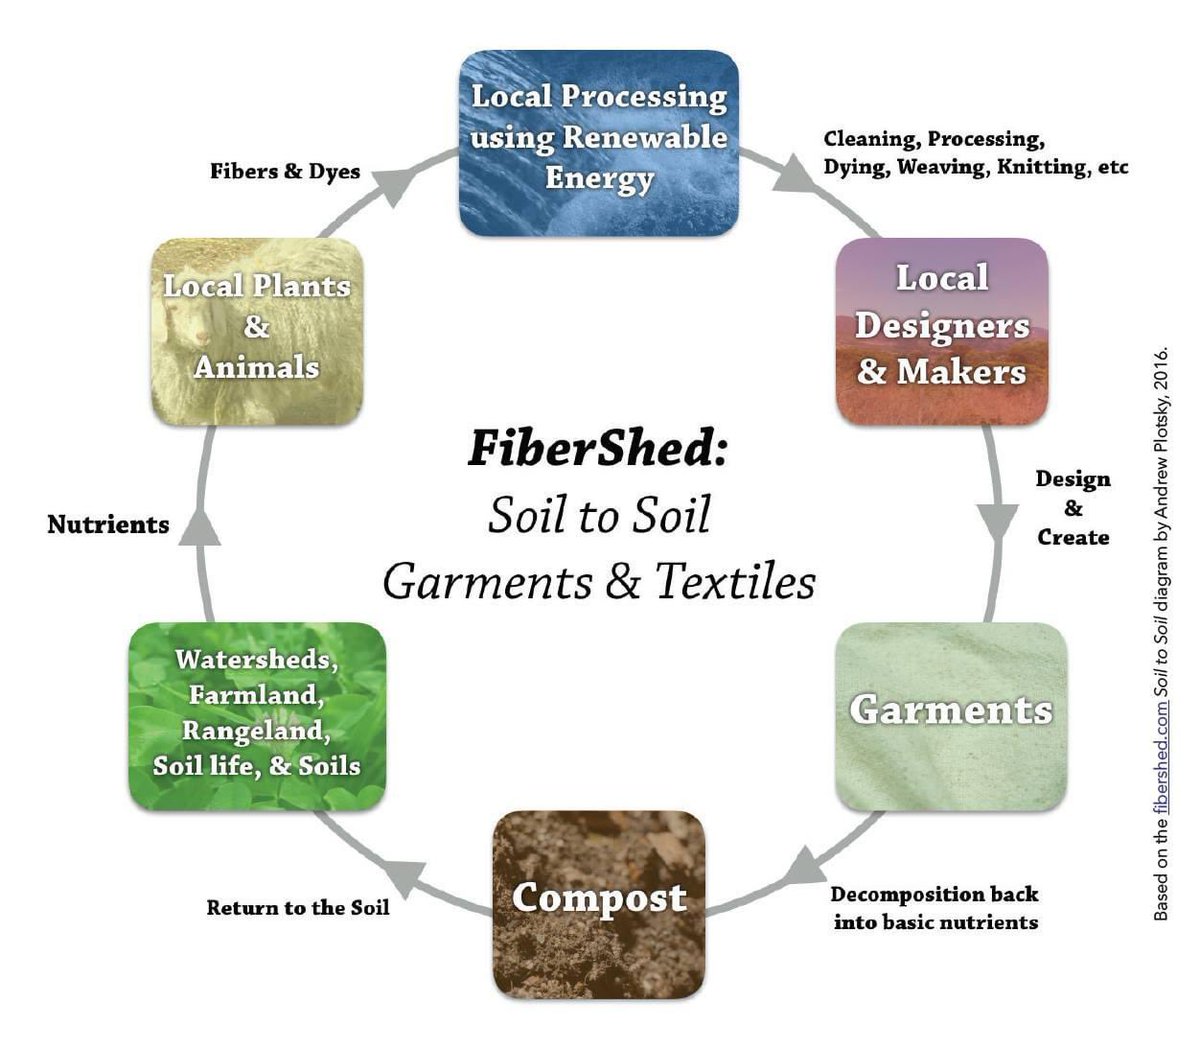 Have you heard of the #Fibershed concept and organization? From The #Permaculture Student 2 - download it for free here: thepermaculturestudent.com/download-ps2-f…